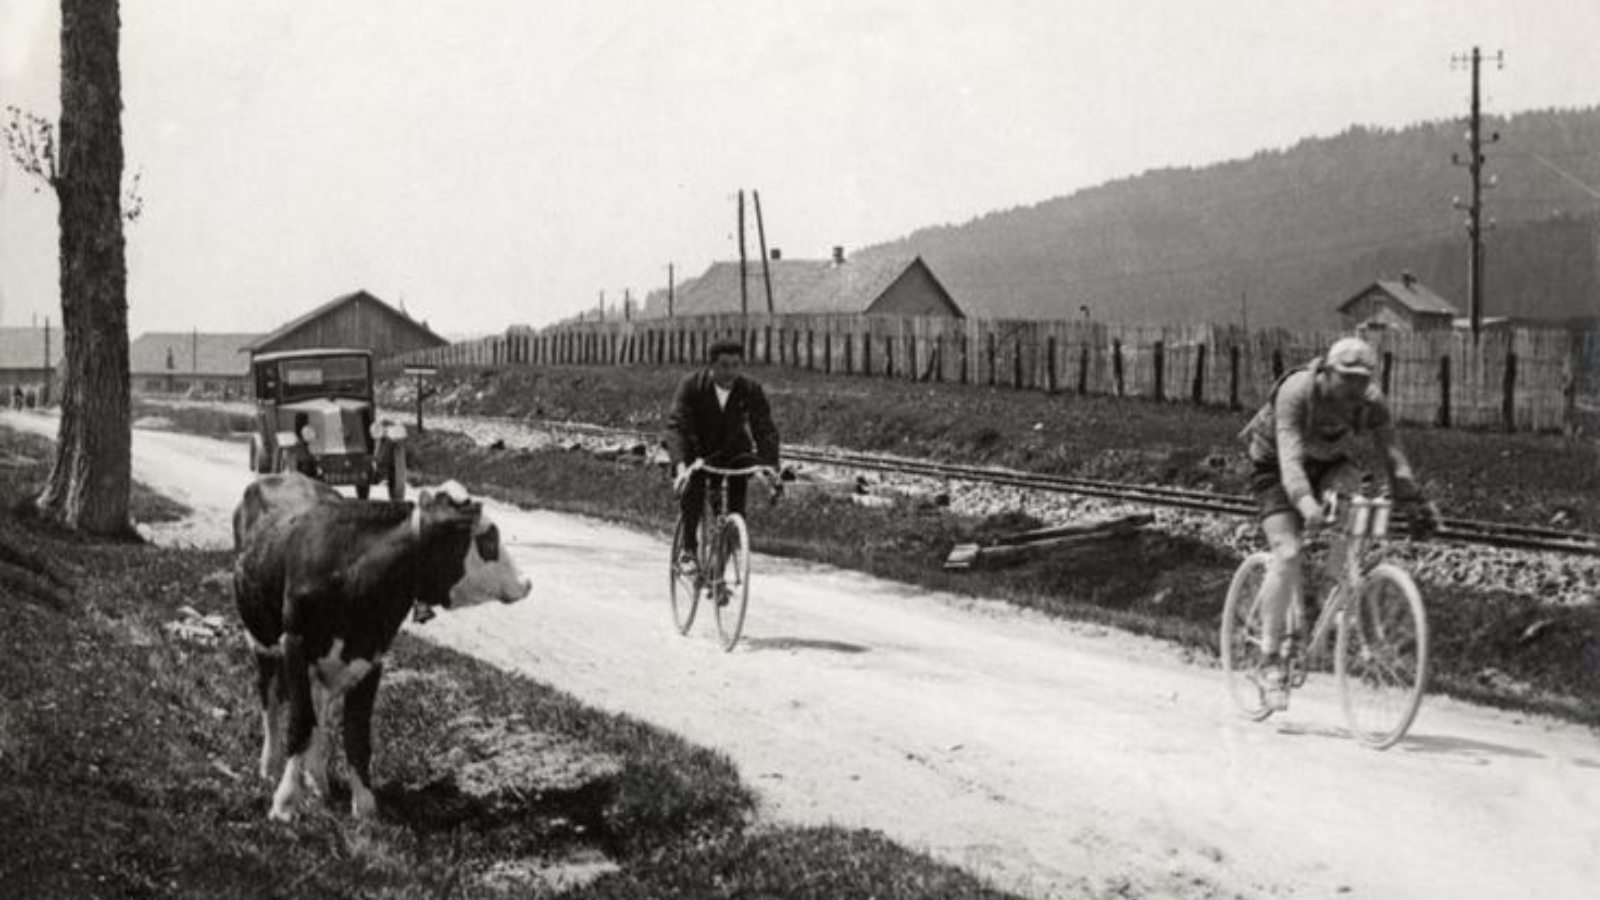 Vintage black and white image of Tour de France in 1926. Two riders are riding in the road, while a cow is watching them from the roadside.